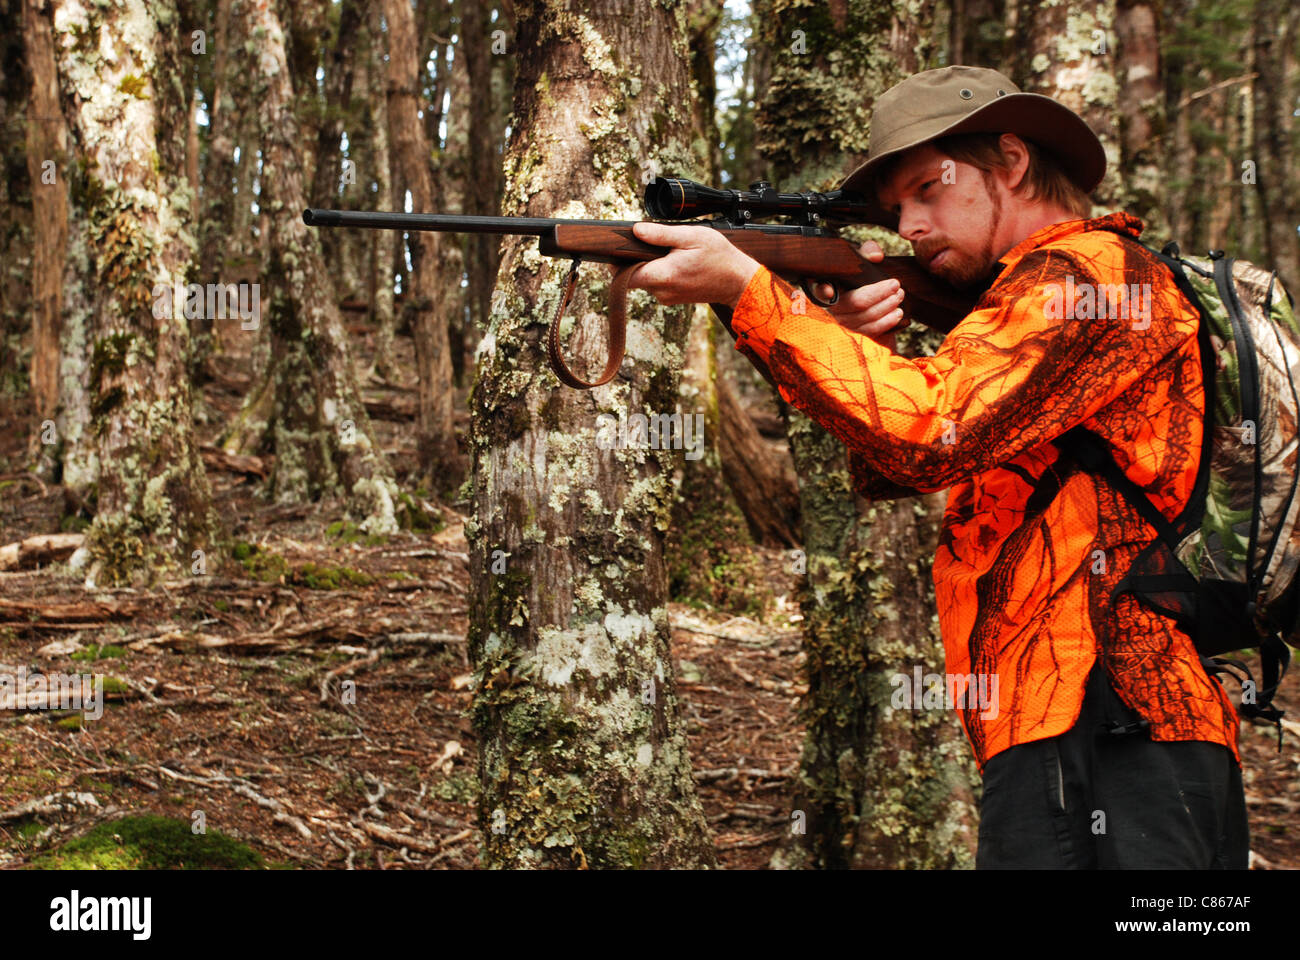 hunter wearing blaze safety clothing aiming rifle in forest Stock Photo